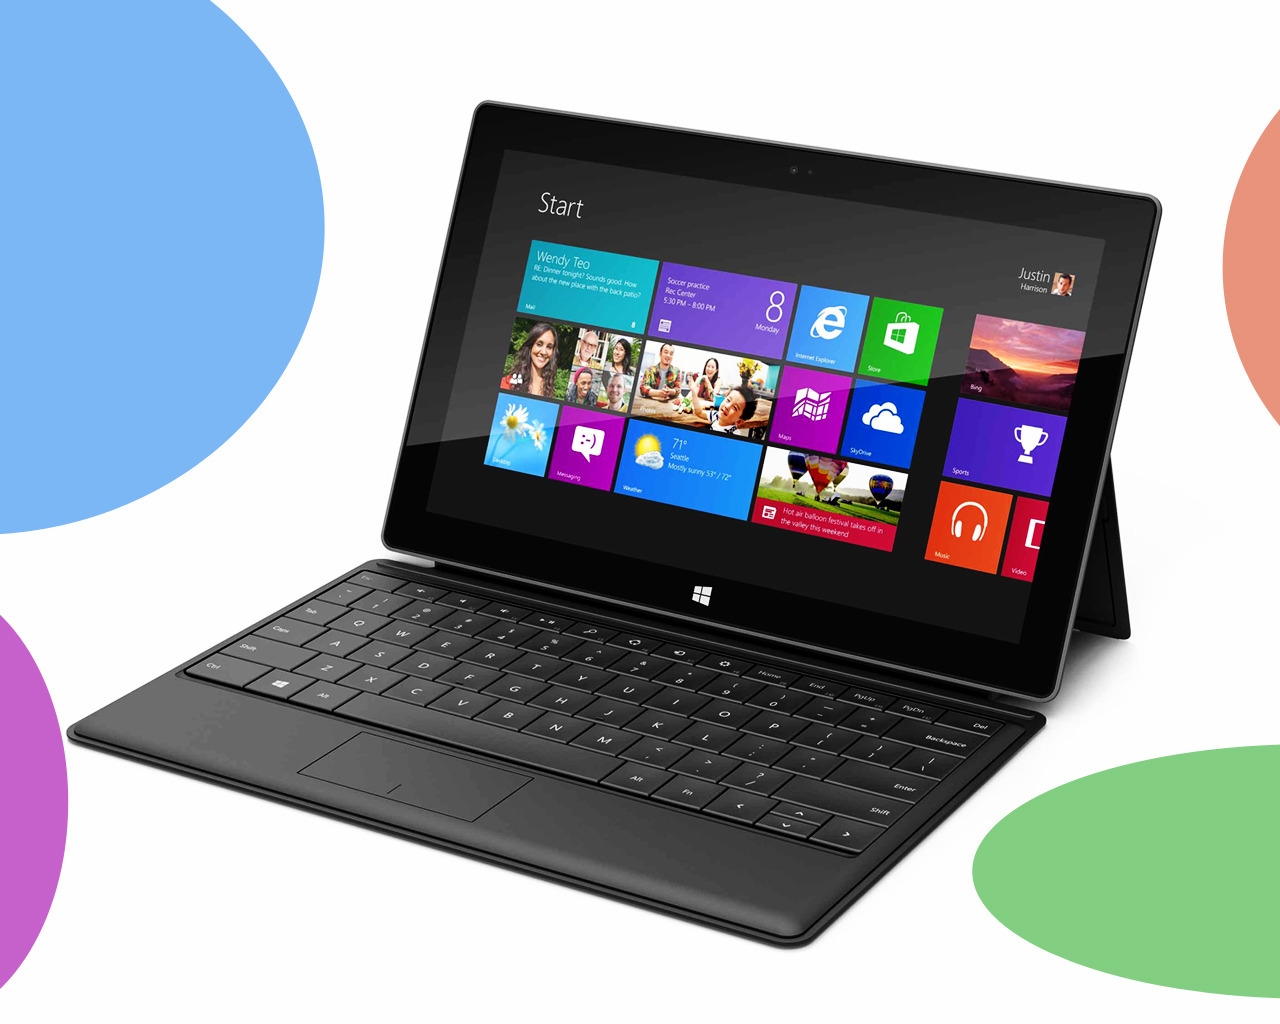 Microsoft Surface Tablet for 1280 x 1024 resolution